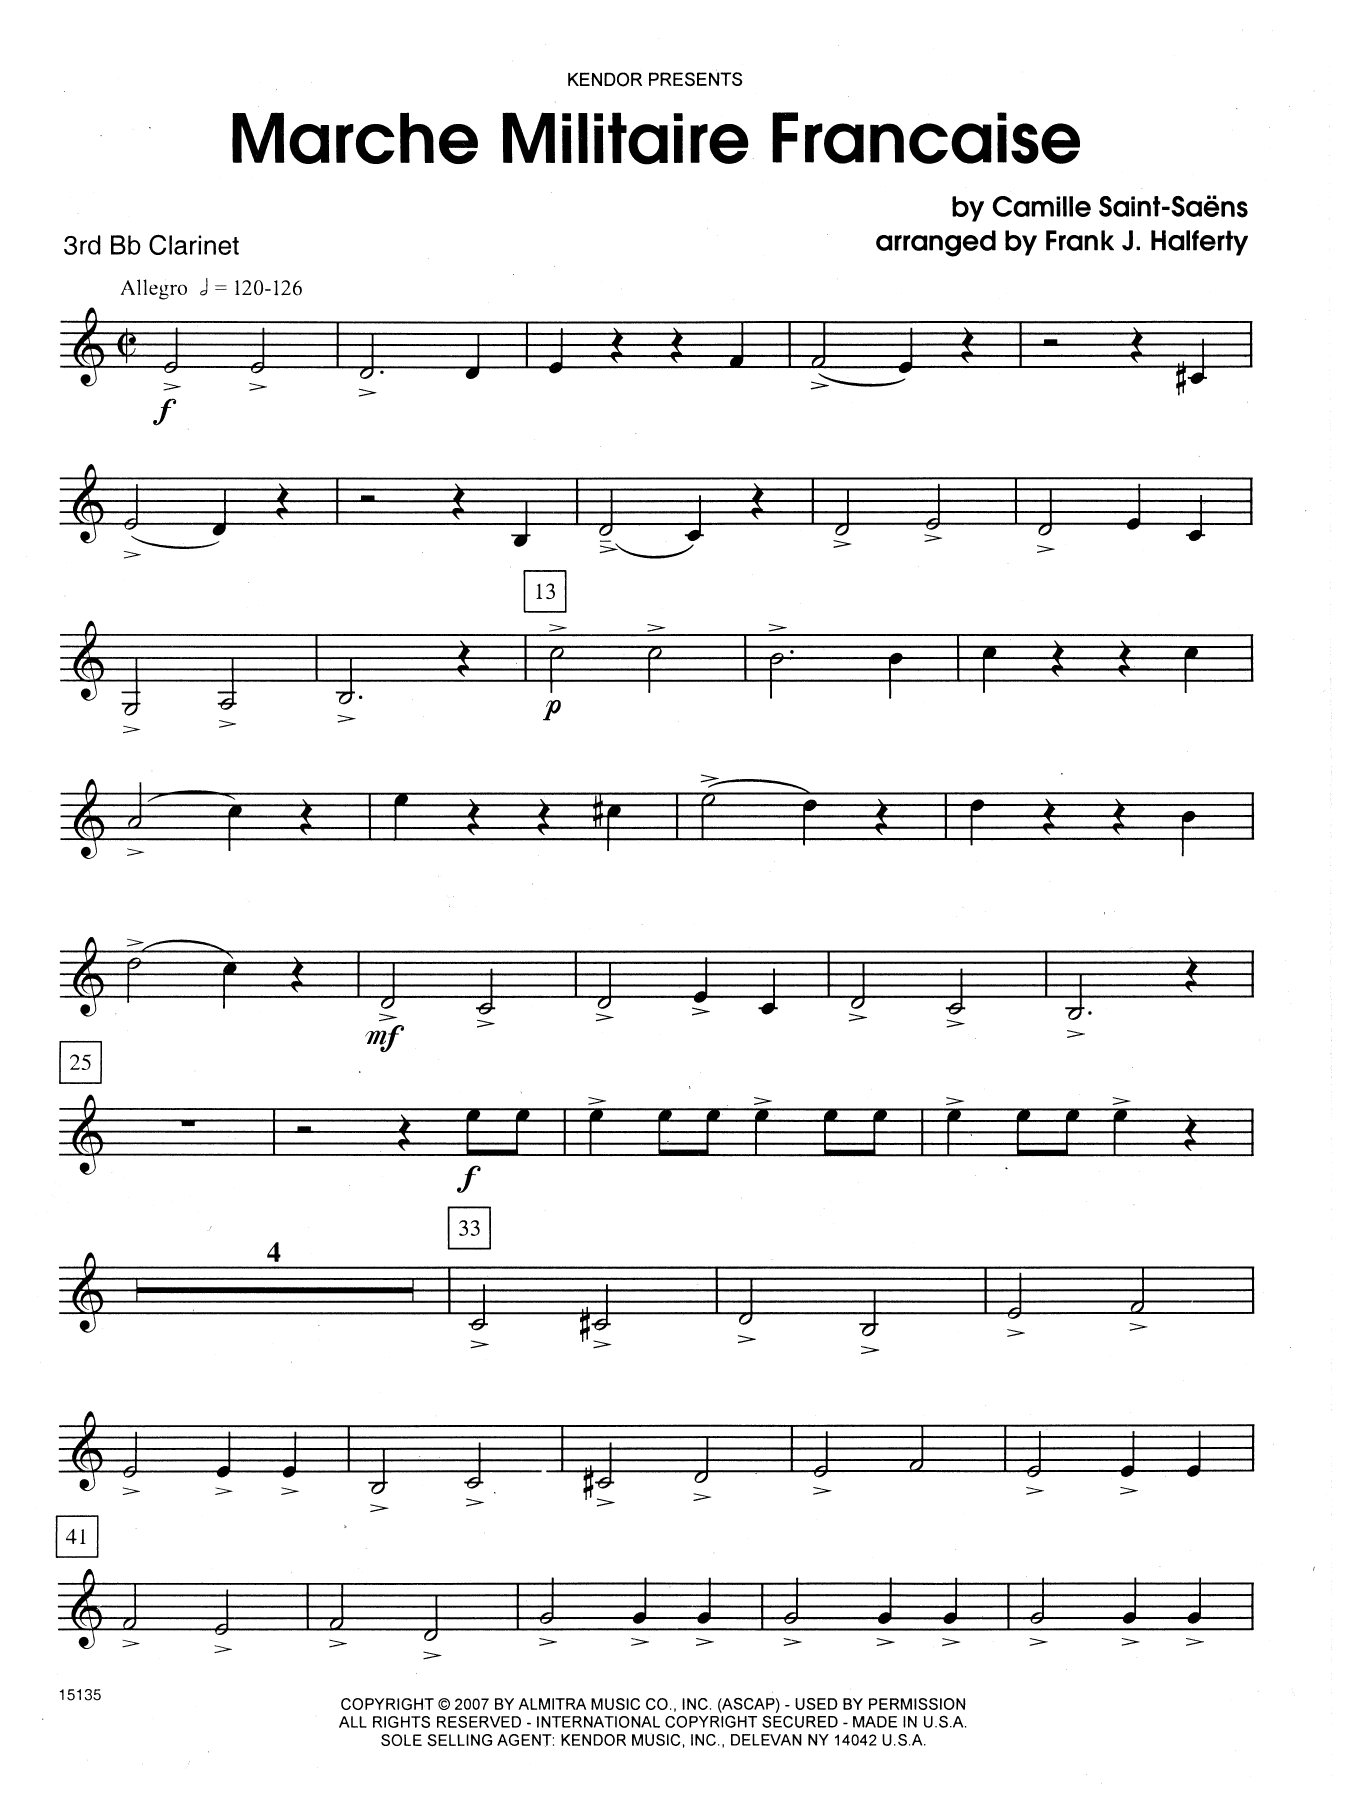 Frank J. Halferty Marche Militaire Francaise - 3rd Bb Clarinet sheet music notes and chords. Download Printable PDF.